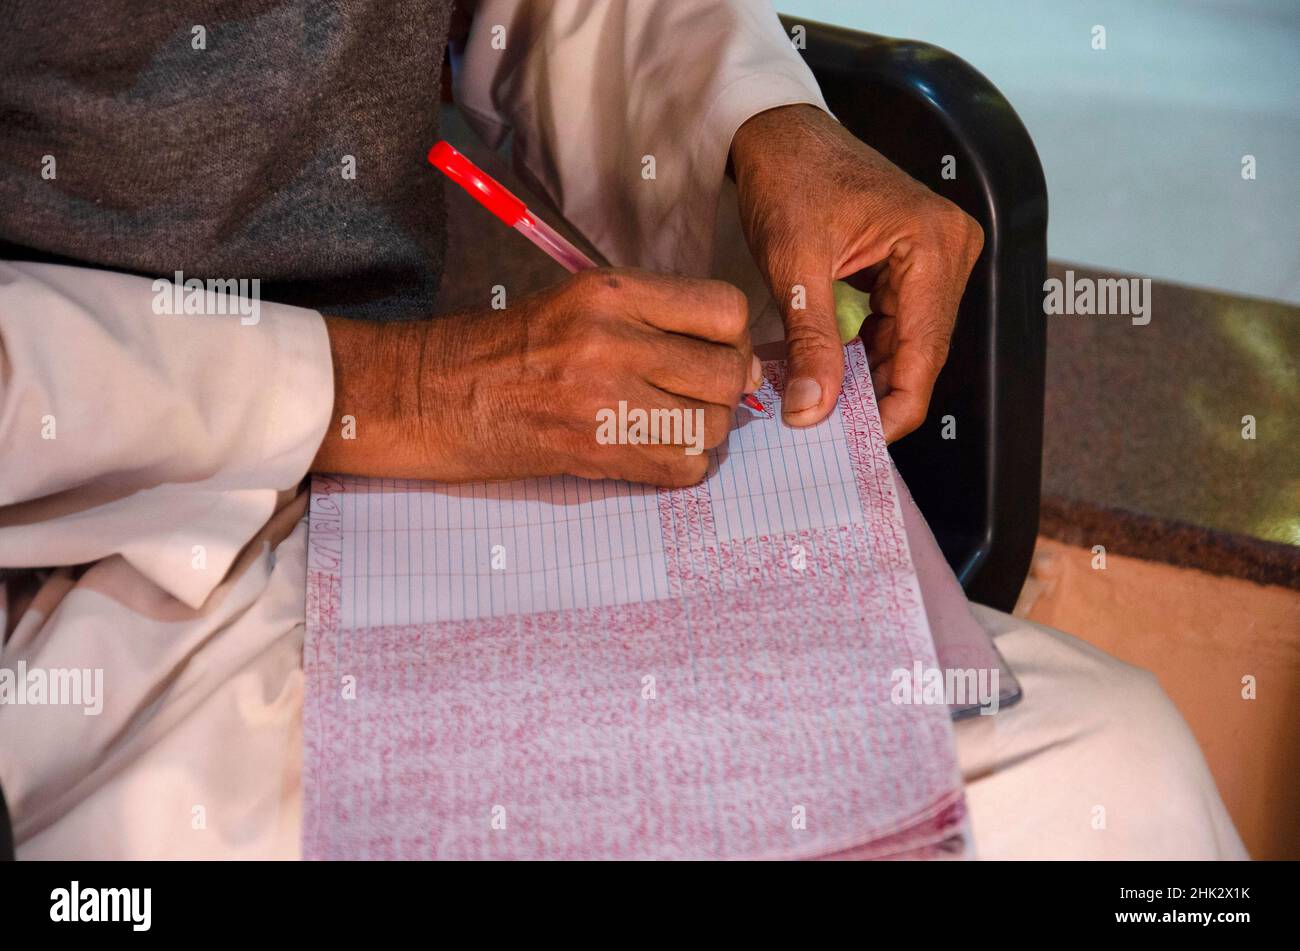 Devotee writing the Lord's name in book inside the temple at Nilkanthdham, Swaminarayan temple, Poicha, Gujarat, India Stock Photo